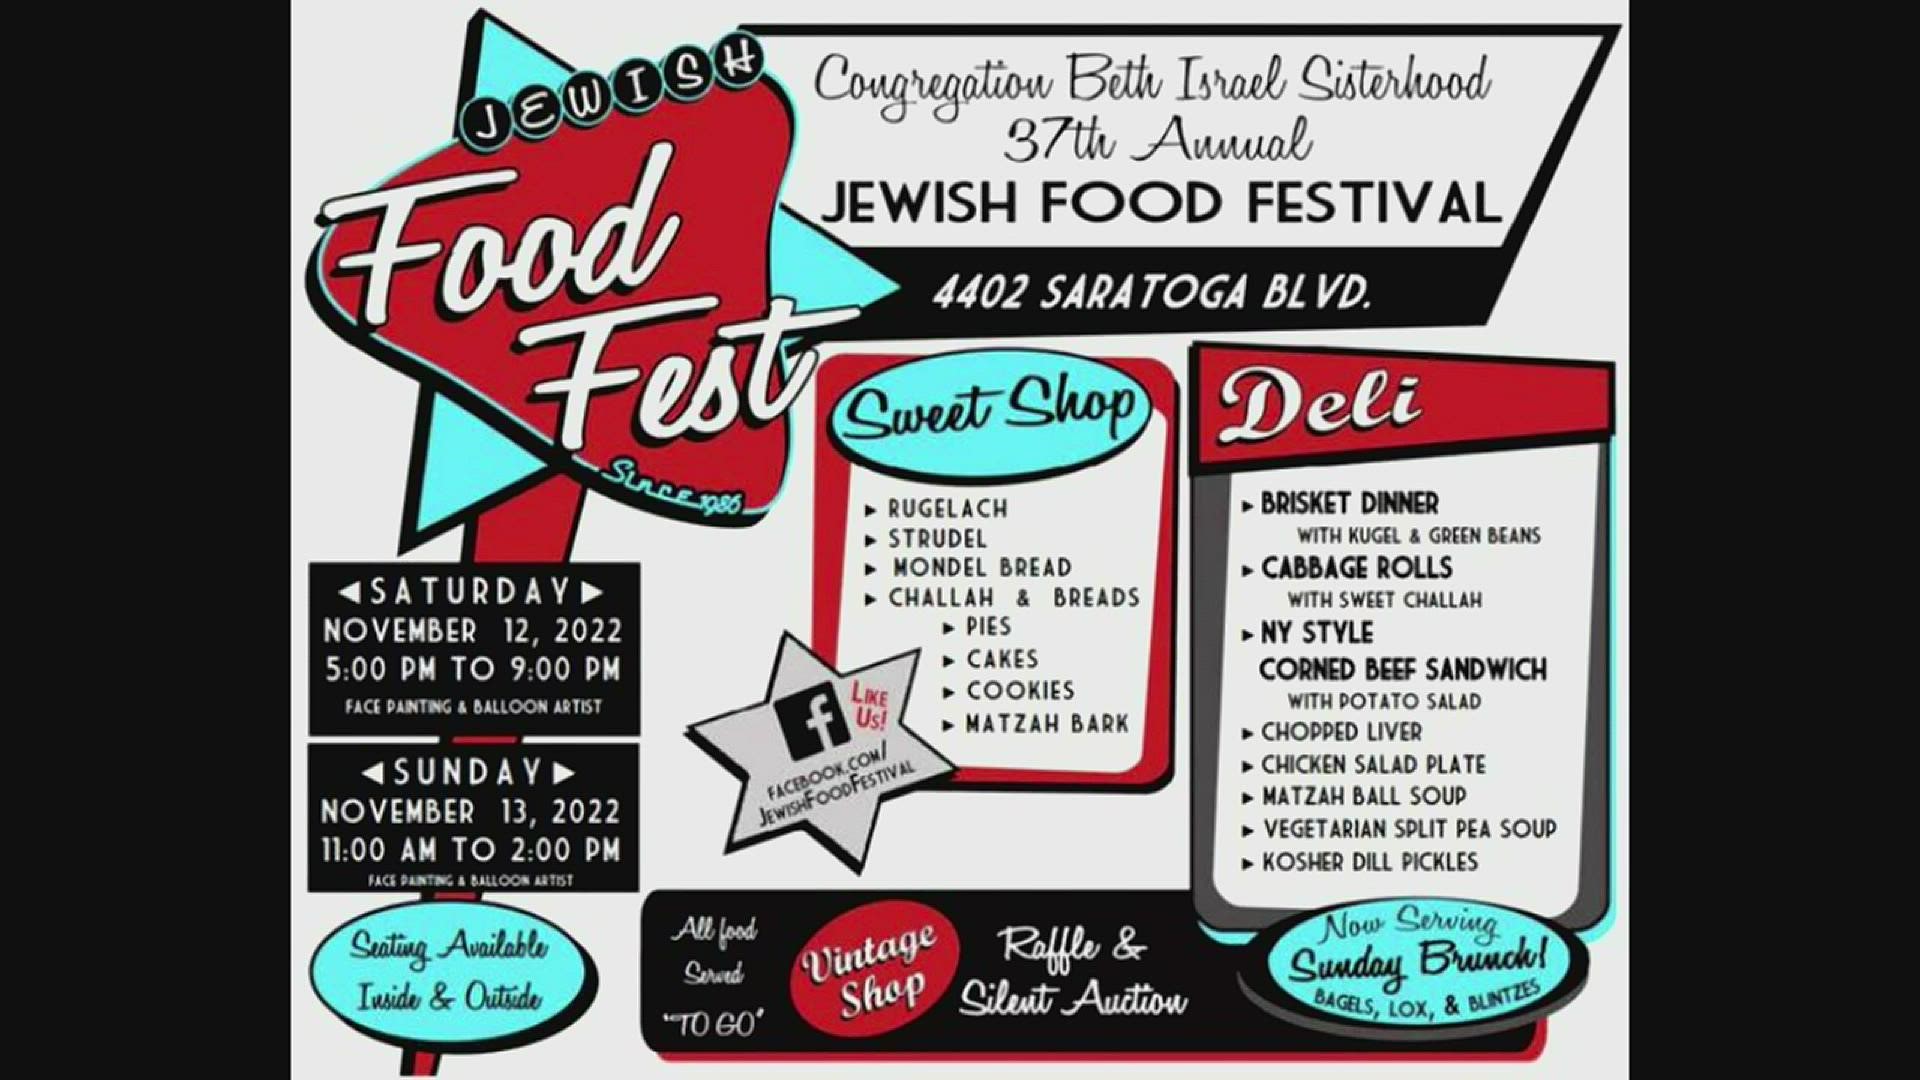 Marcus Lozano dishes on all the good stuff we can expect at this year's 37th Annual Jewish Food Festival, including everything from food to fashion.